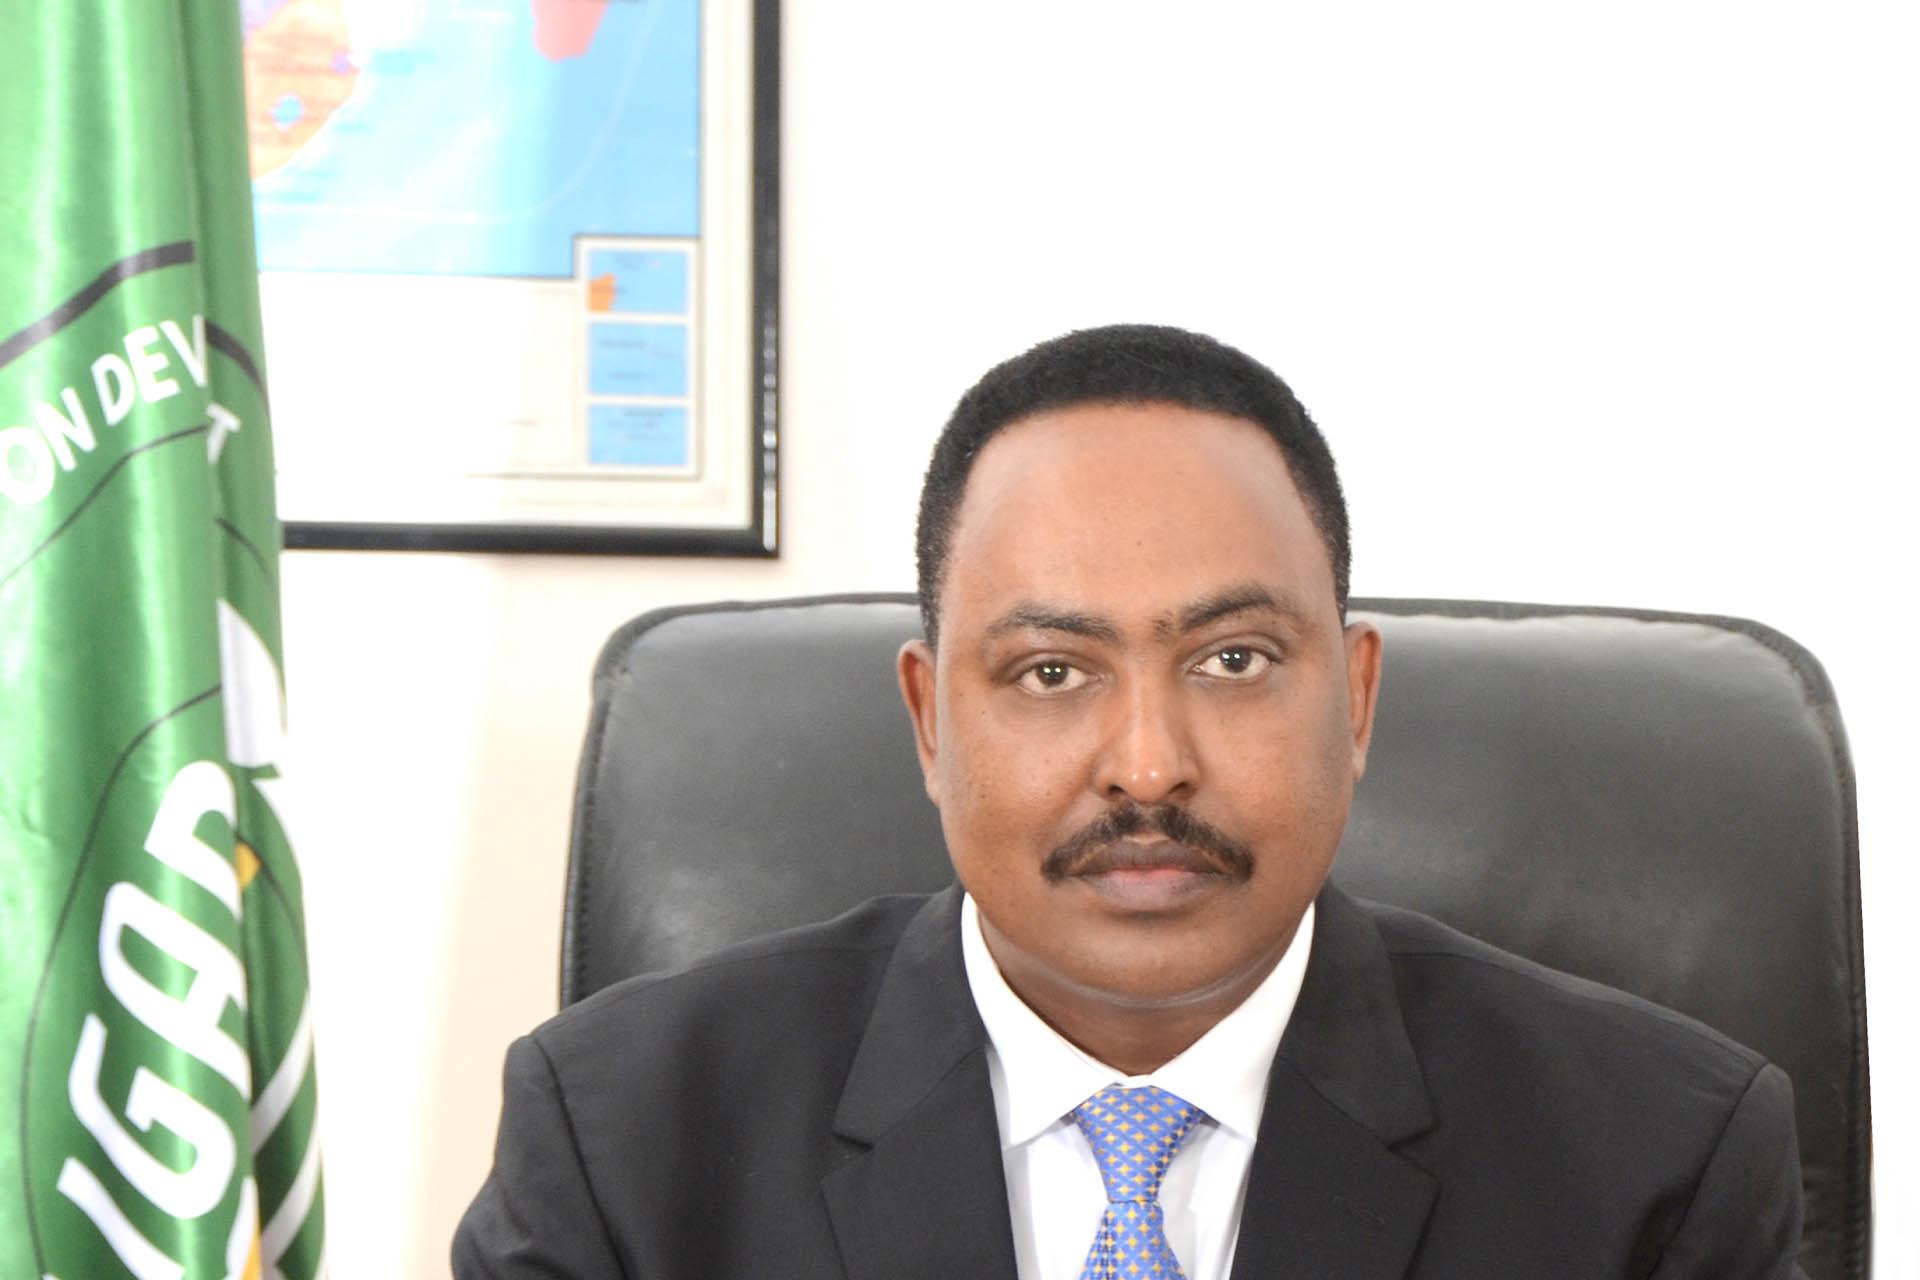 Official Remarks by Workneh Gebeyehu, IGAD Executive Secretary at the African Union Coordination Committee Meeting12:00pm, Monday 11th October 2021.